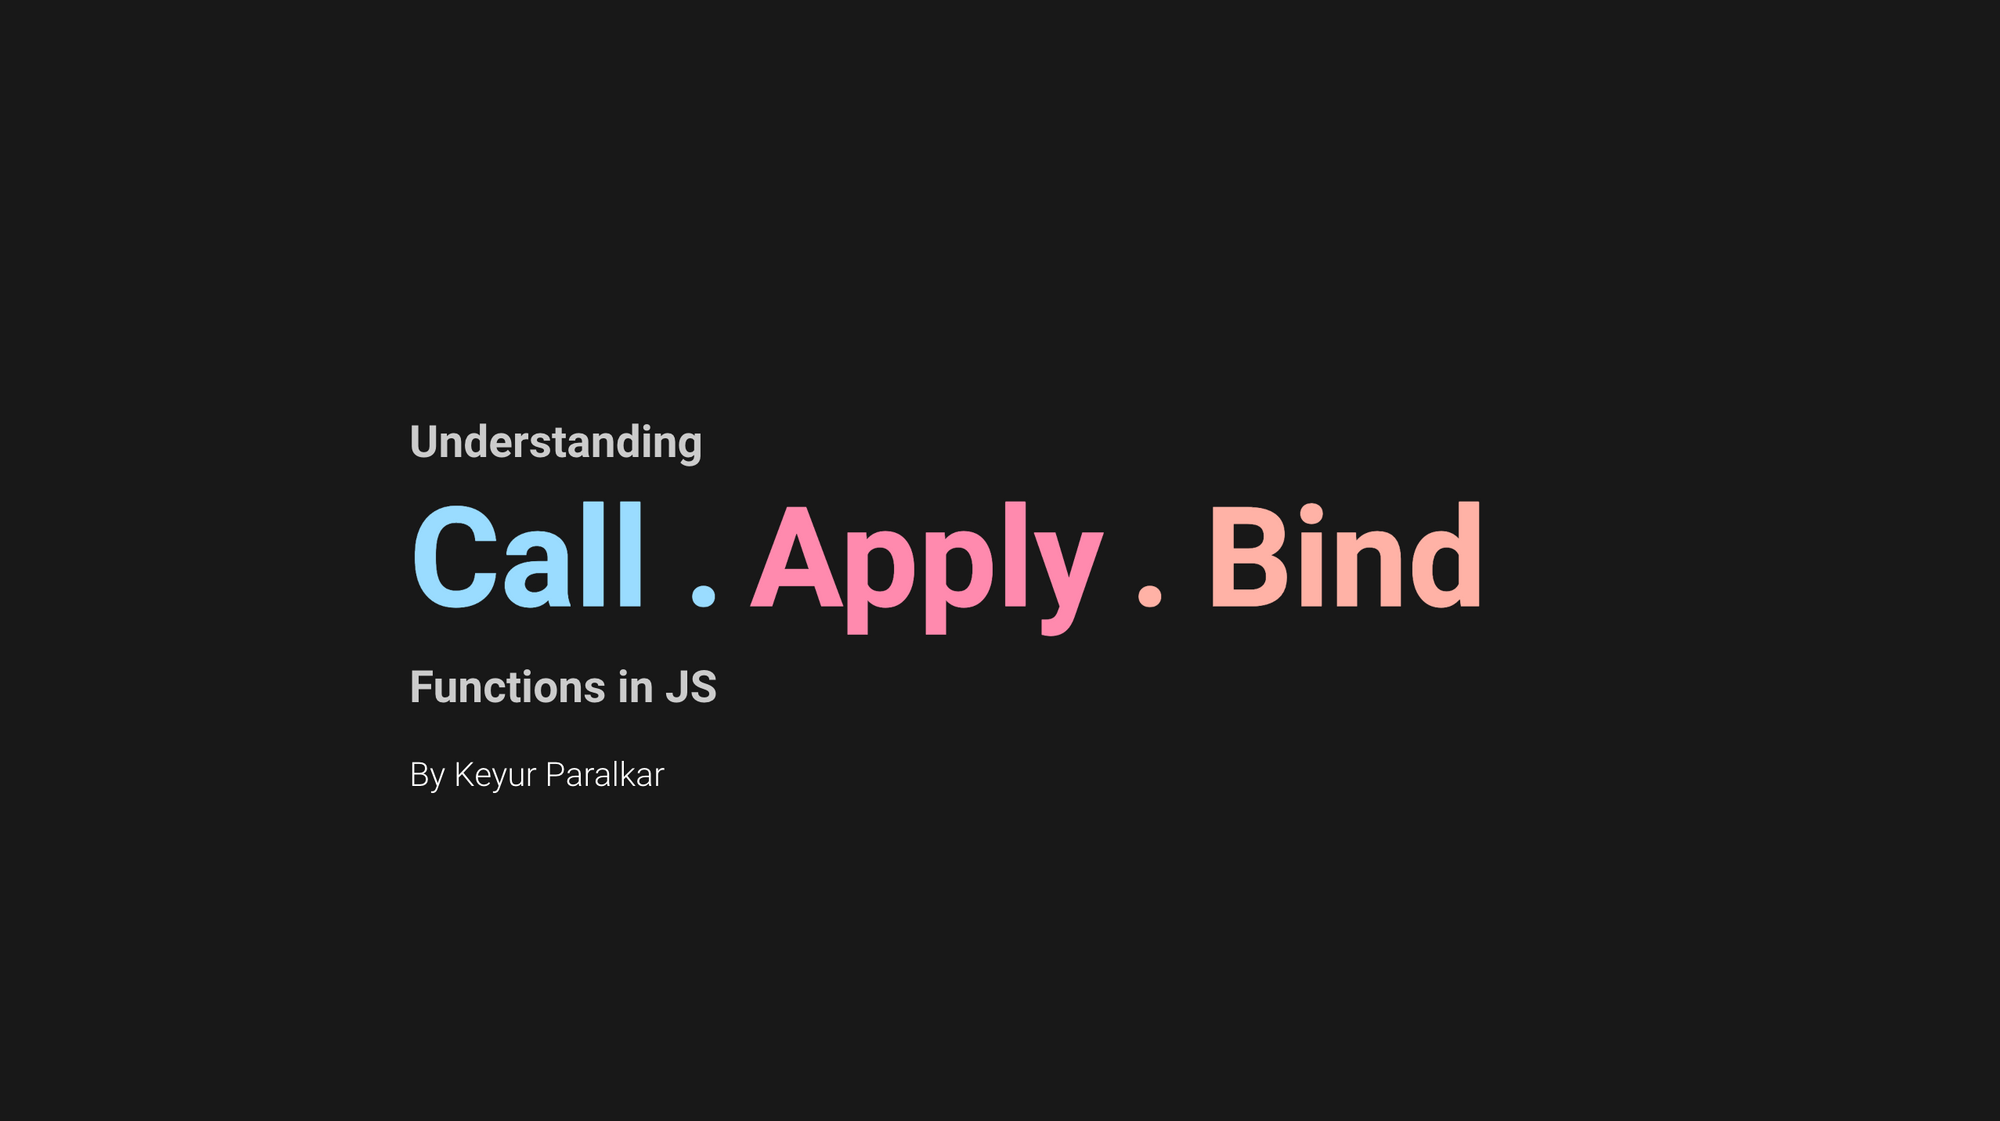 Call, Apply, and Bind Functions in JavaScript